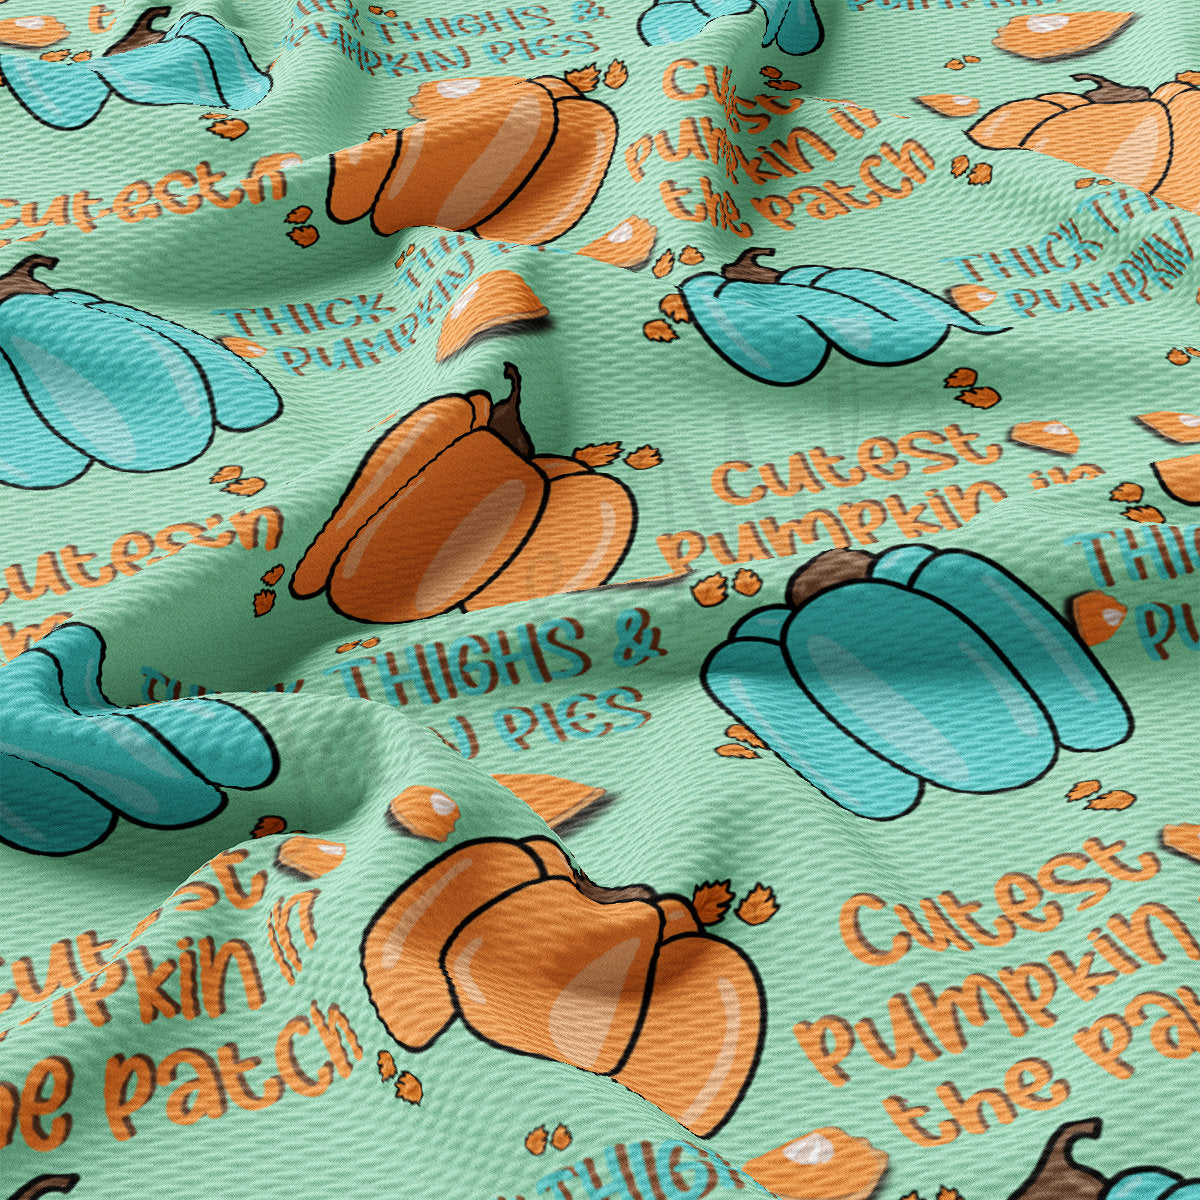 Cutest Pumpkin In the Patch Printed Liverpool Bullet Textured Fabric by the yard  Fabric AA2143